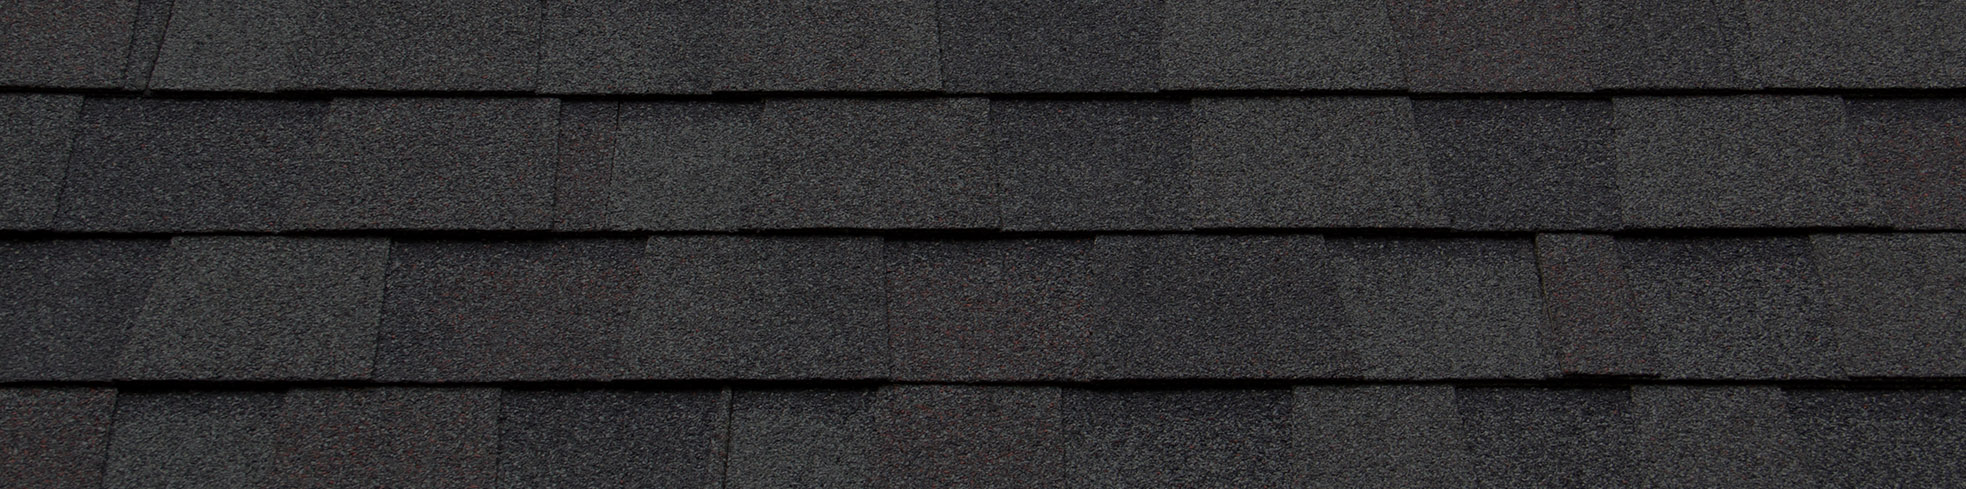 Replacement asphalt shingles installed on a Wisconsin roof